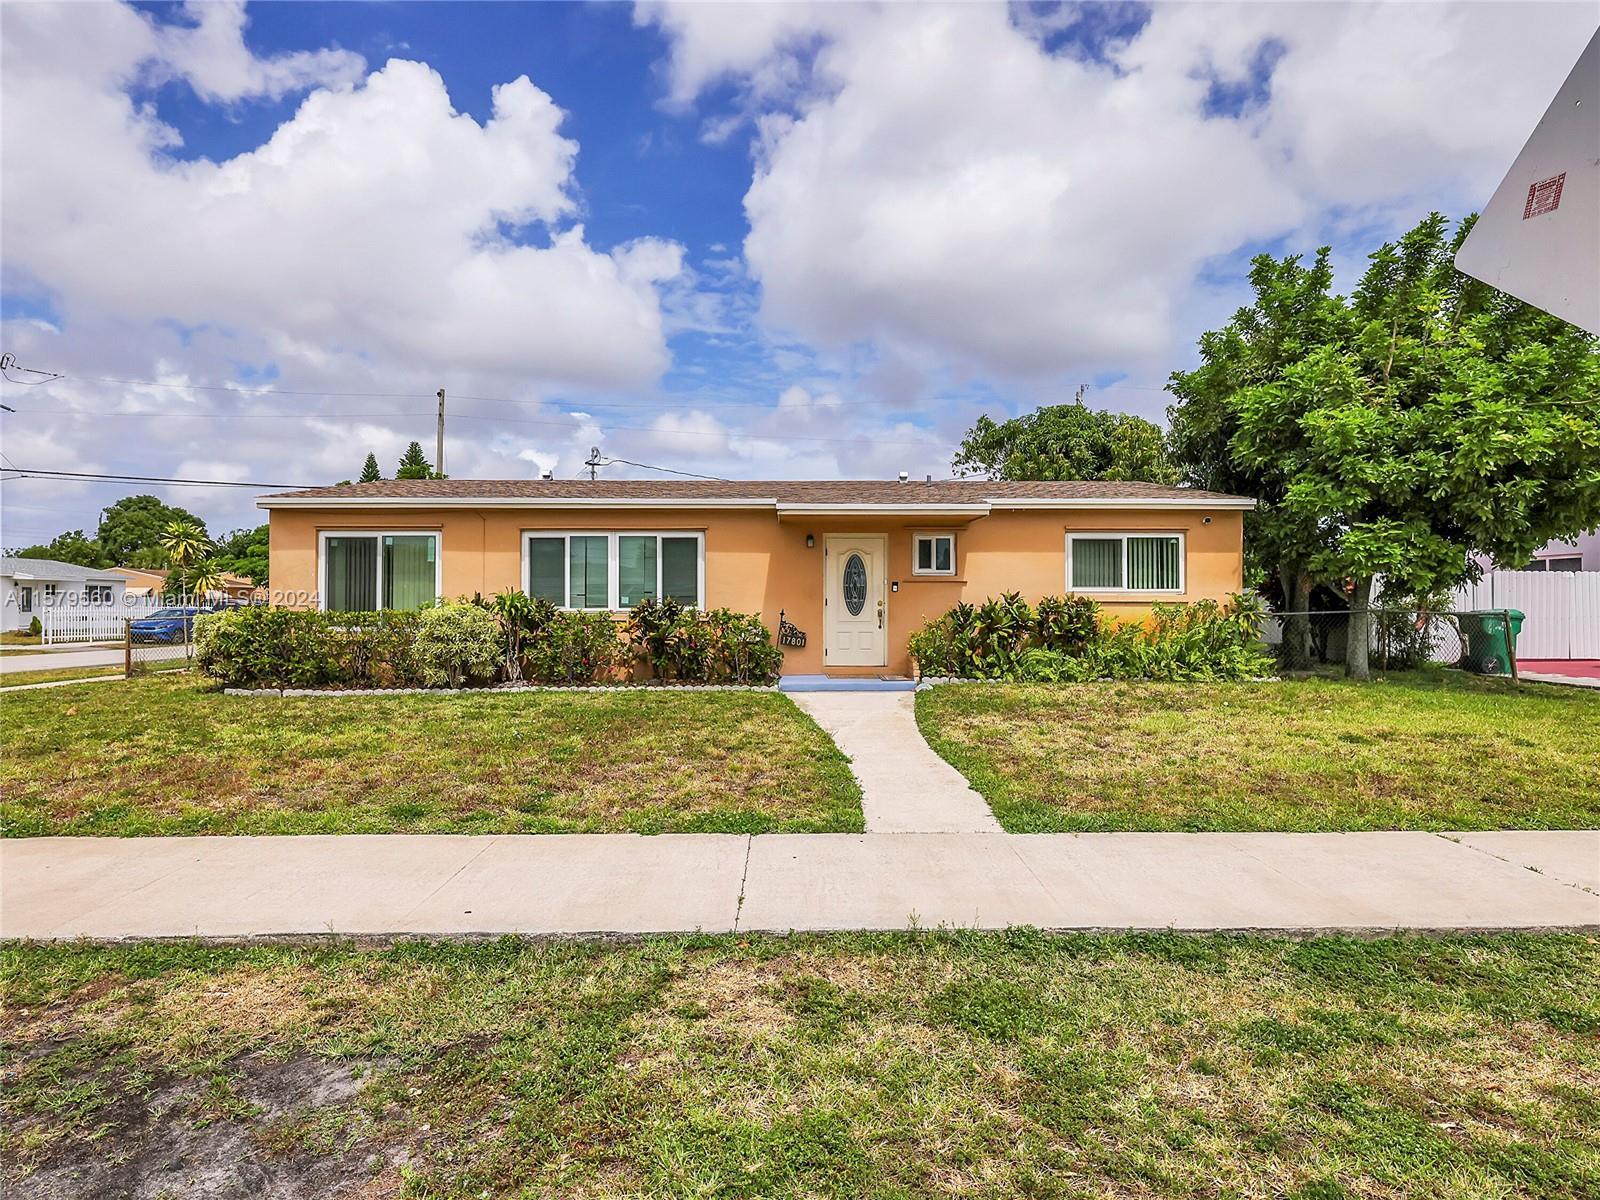 Photo of 17801 NW 14th Ave in Miami Gardens, FL